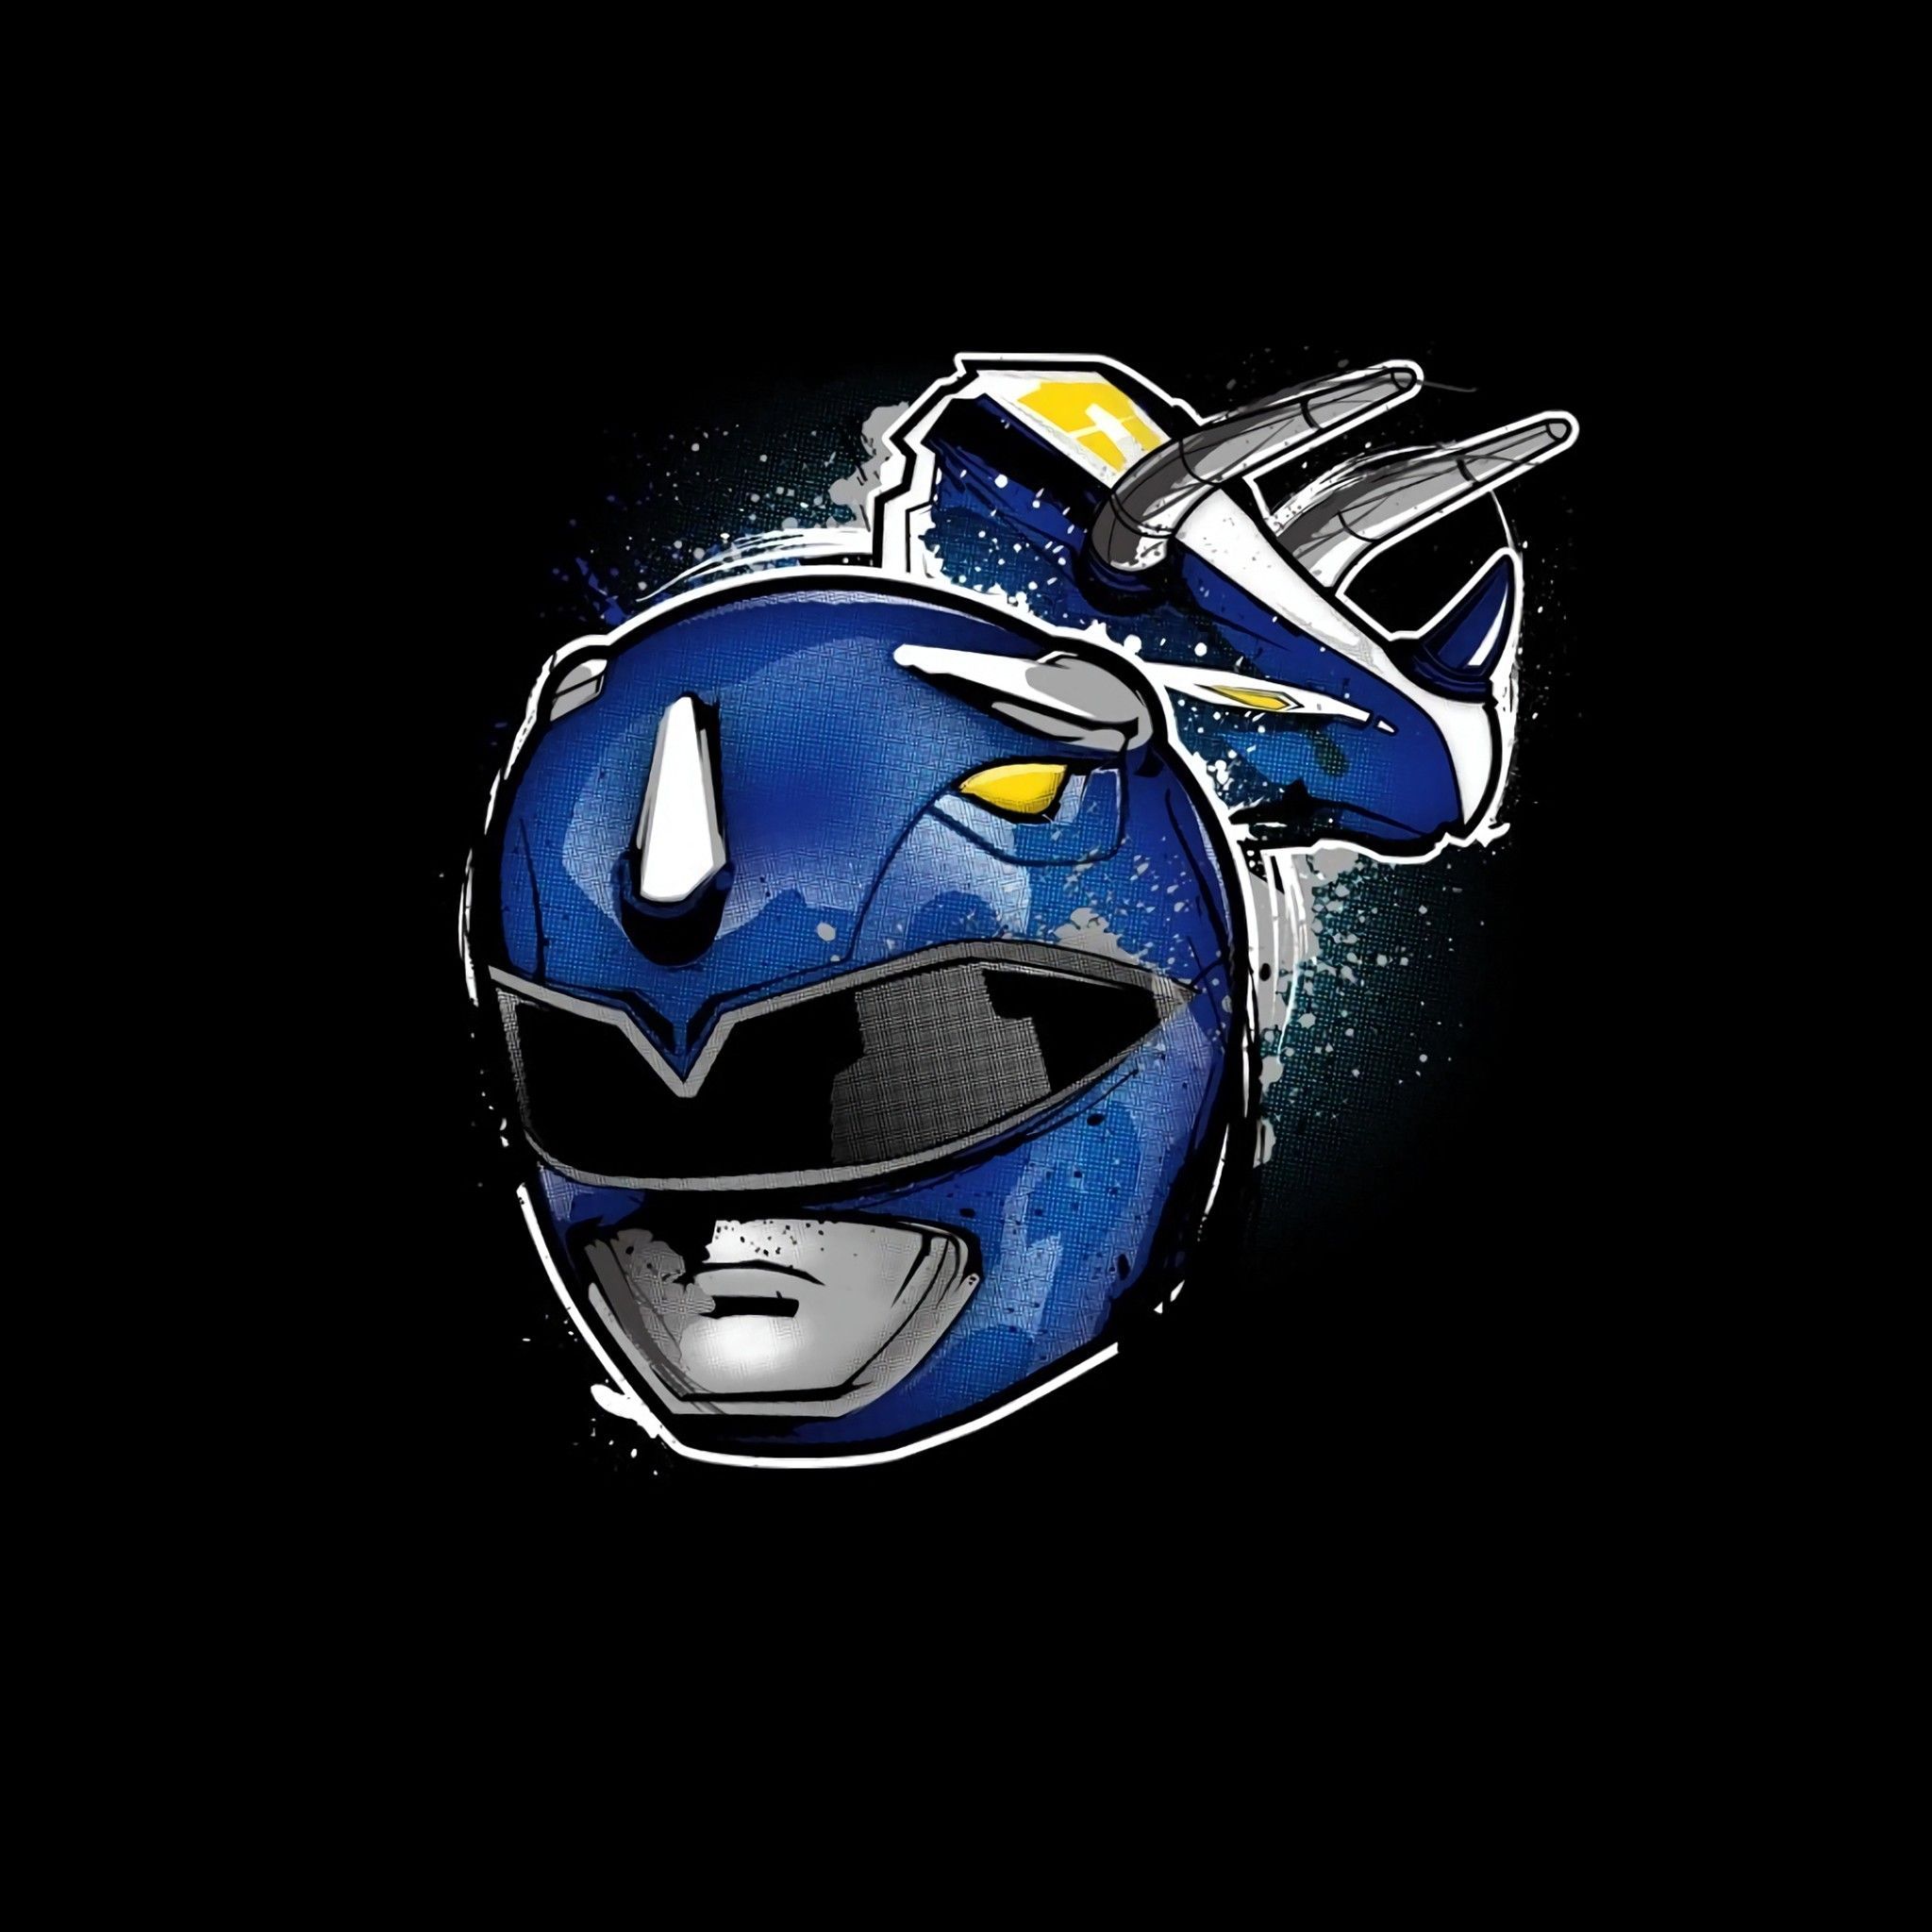 Blue Power ranger to see more animated Power rangers wallpaper! - iPad mini wallpaper, Power rangers, Wallpaper